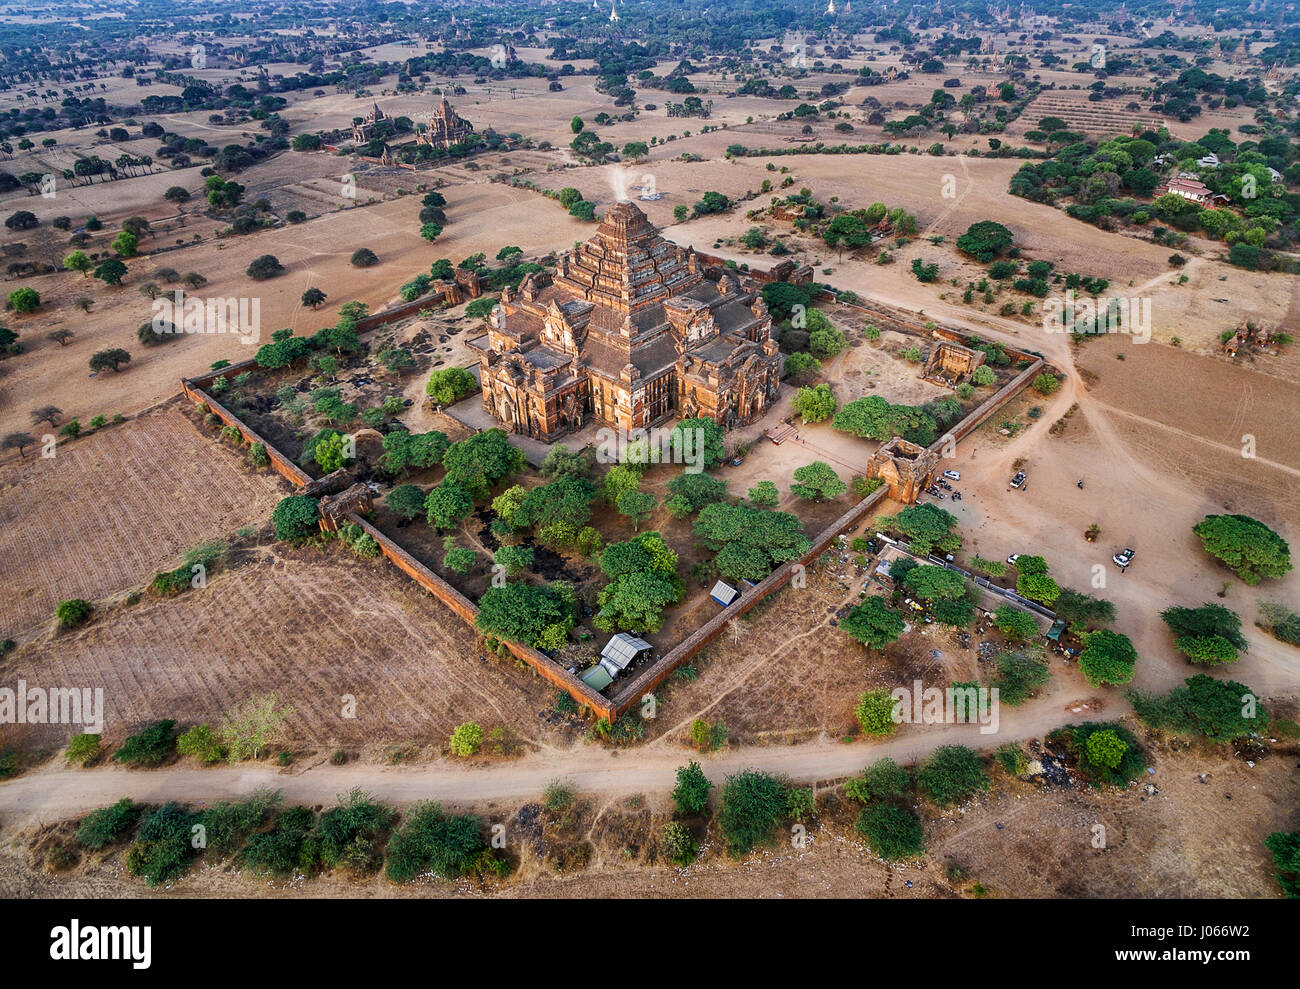 BAGAN, MYANMAR: Dhammayangyi Temple is the largest of all Buddhist temples in Bagan. It was built during the reign of King Narathu 1167-1170. AMAZING aerial drone pictures from three hundred and twenty feet in the air have been captured by an amateur photographer. Pictures and video footage shows the ancient temples around Burma, now known as Myanmar, from above. Showcasing their elegance and dominance over the landscape.  Indian engineer Pradeep Raja (28) from Tamilnadu, travelled to Bagan, Myanmar to shoot these dizzying shots, spending a total of six days on location. Stock Photo